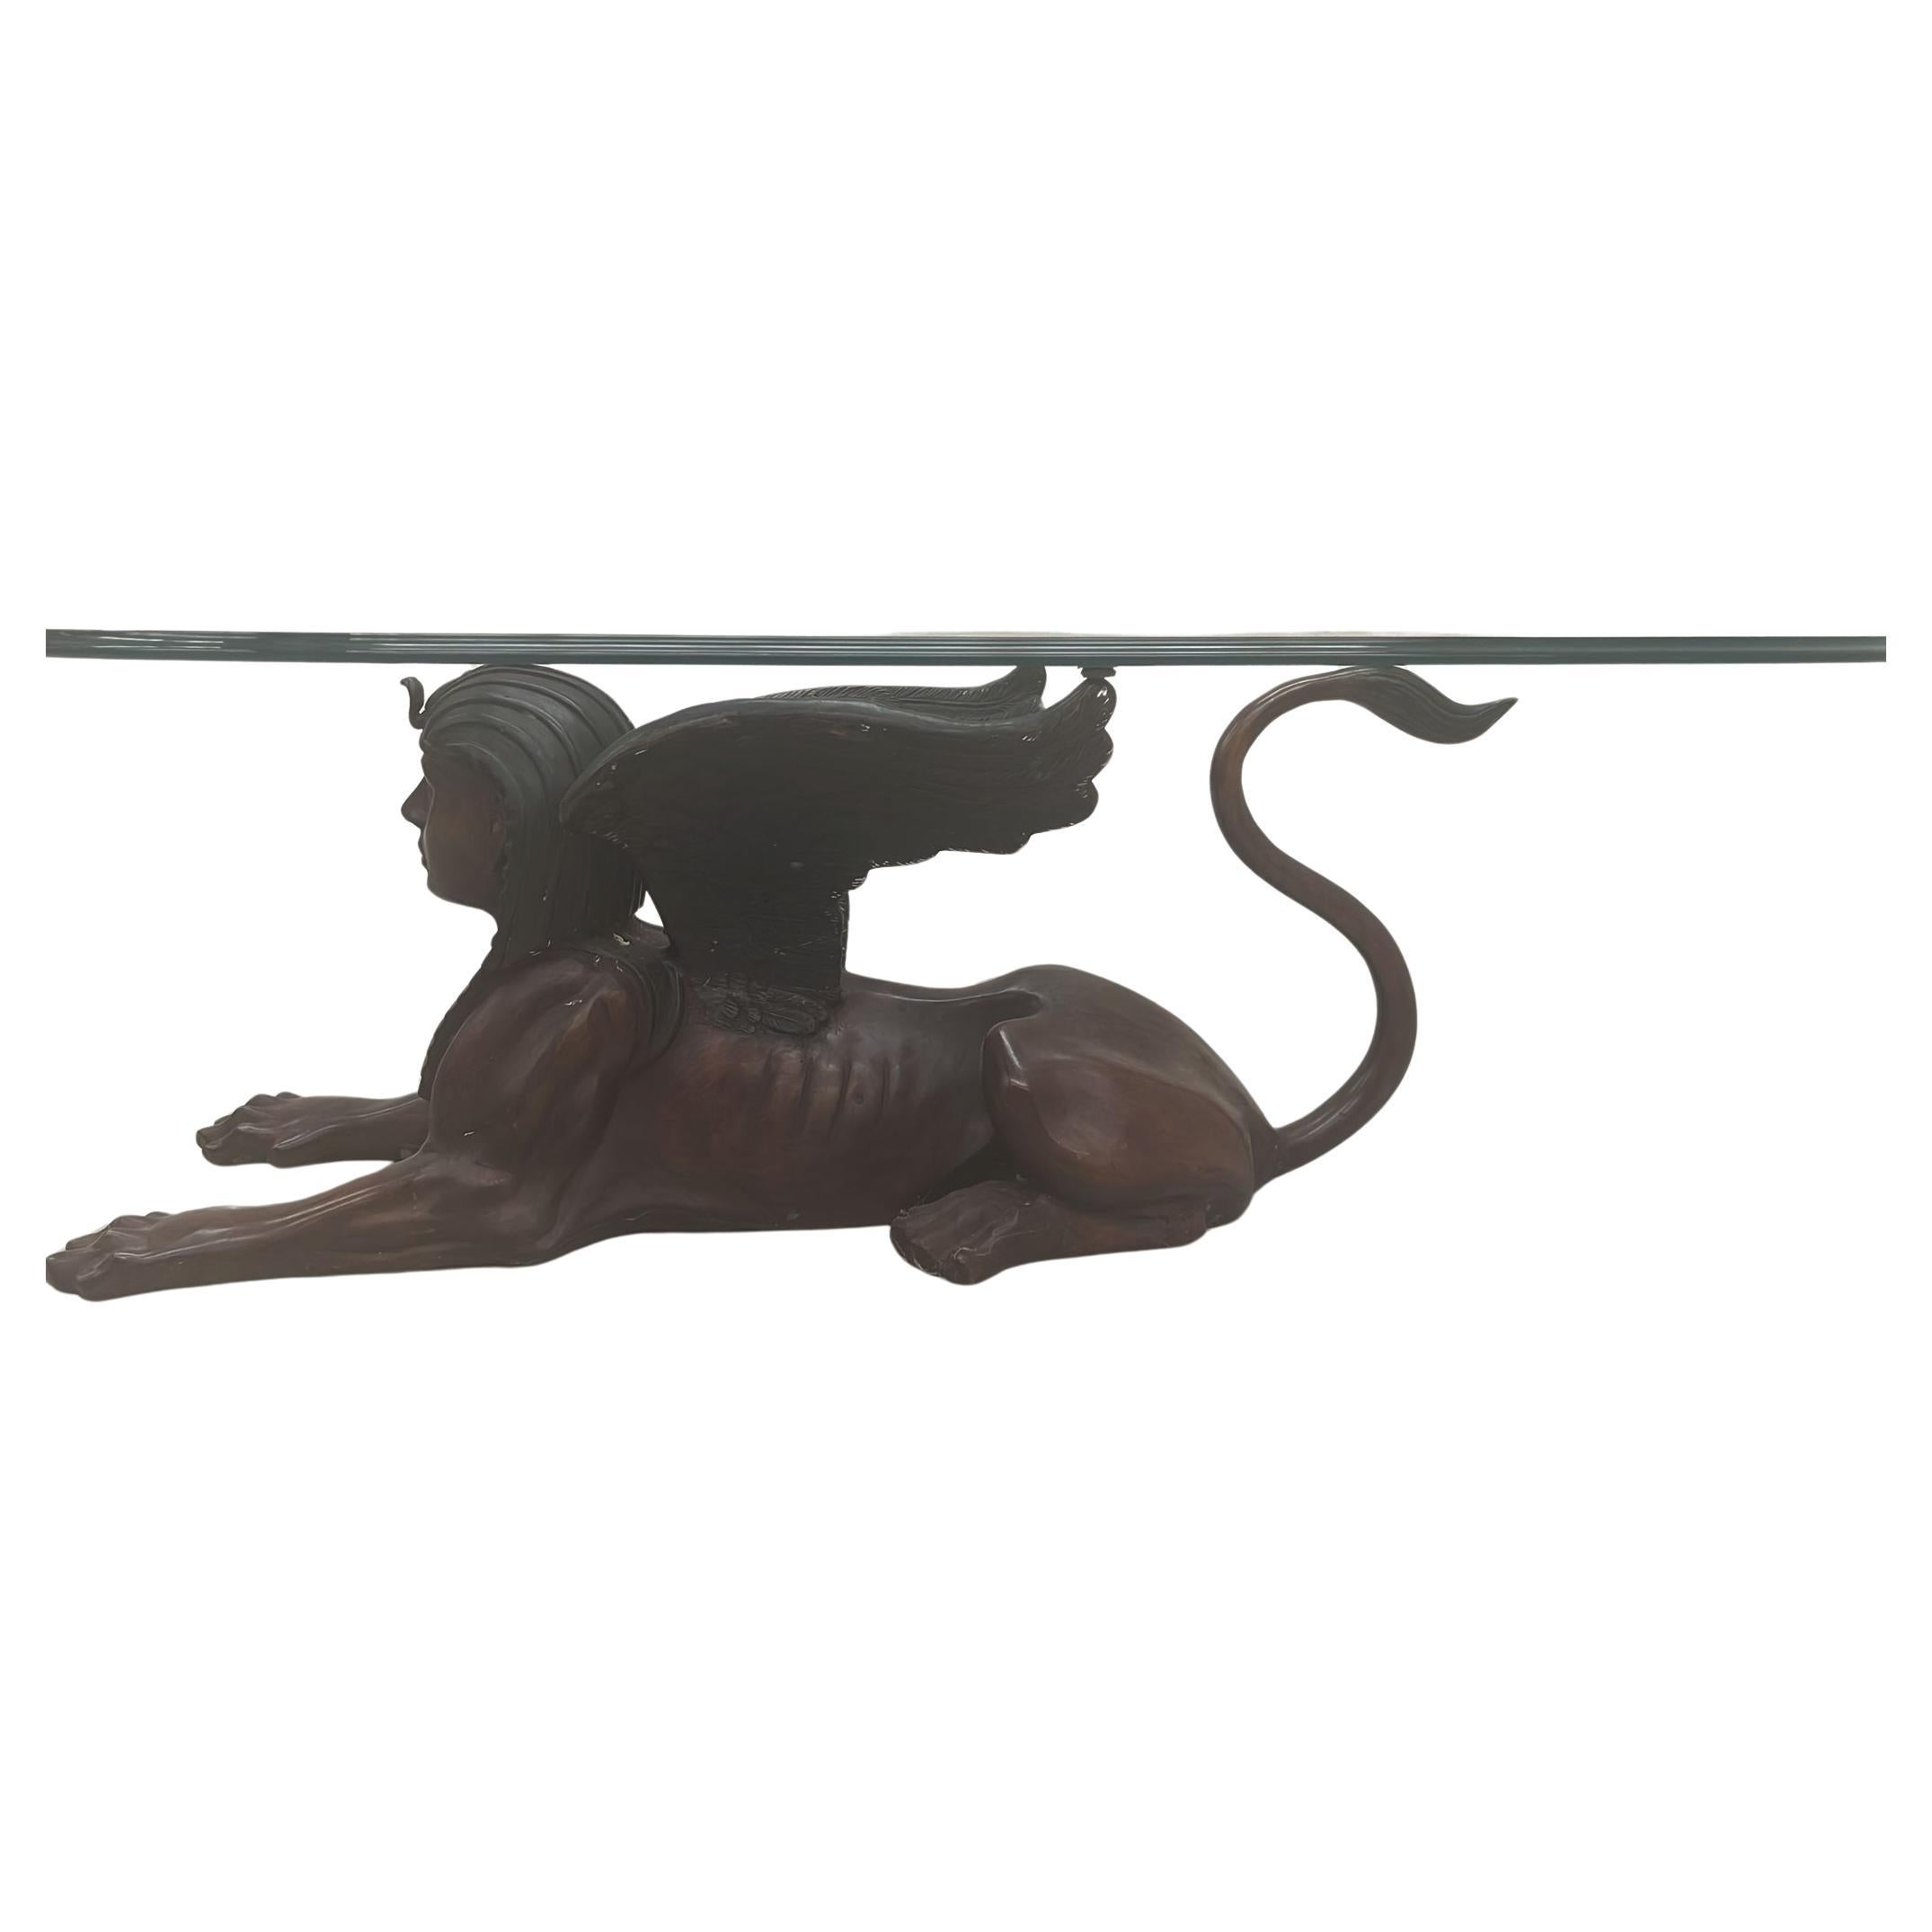 Wonderful bronze sphinx sculpture with table function. Design Mice